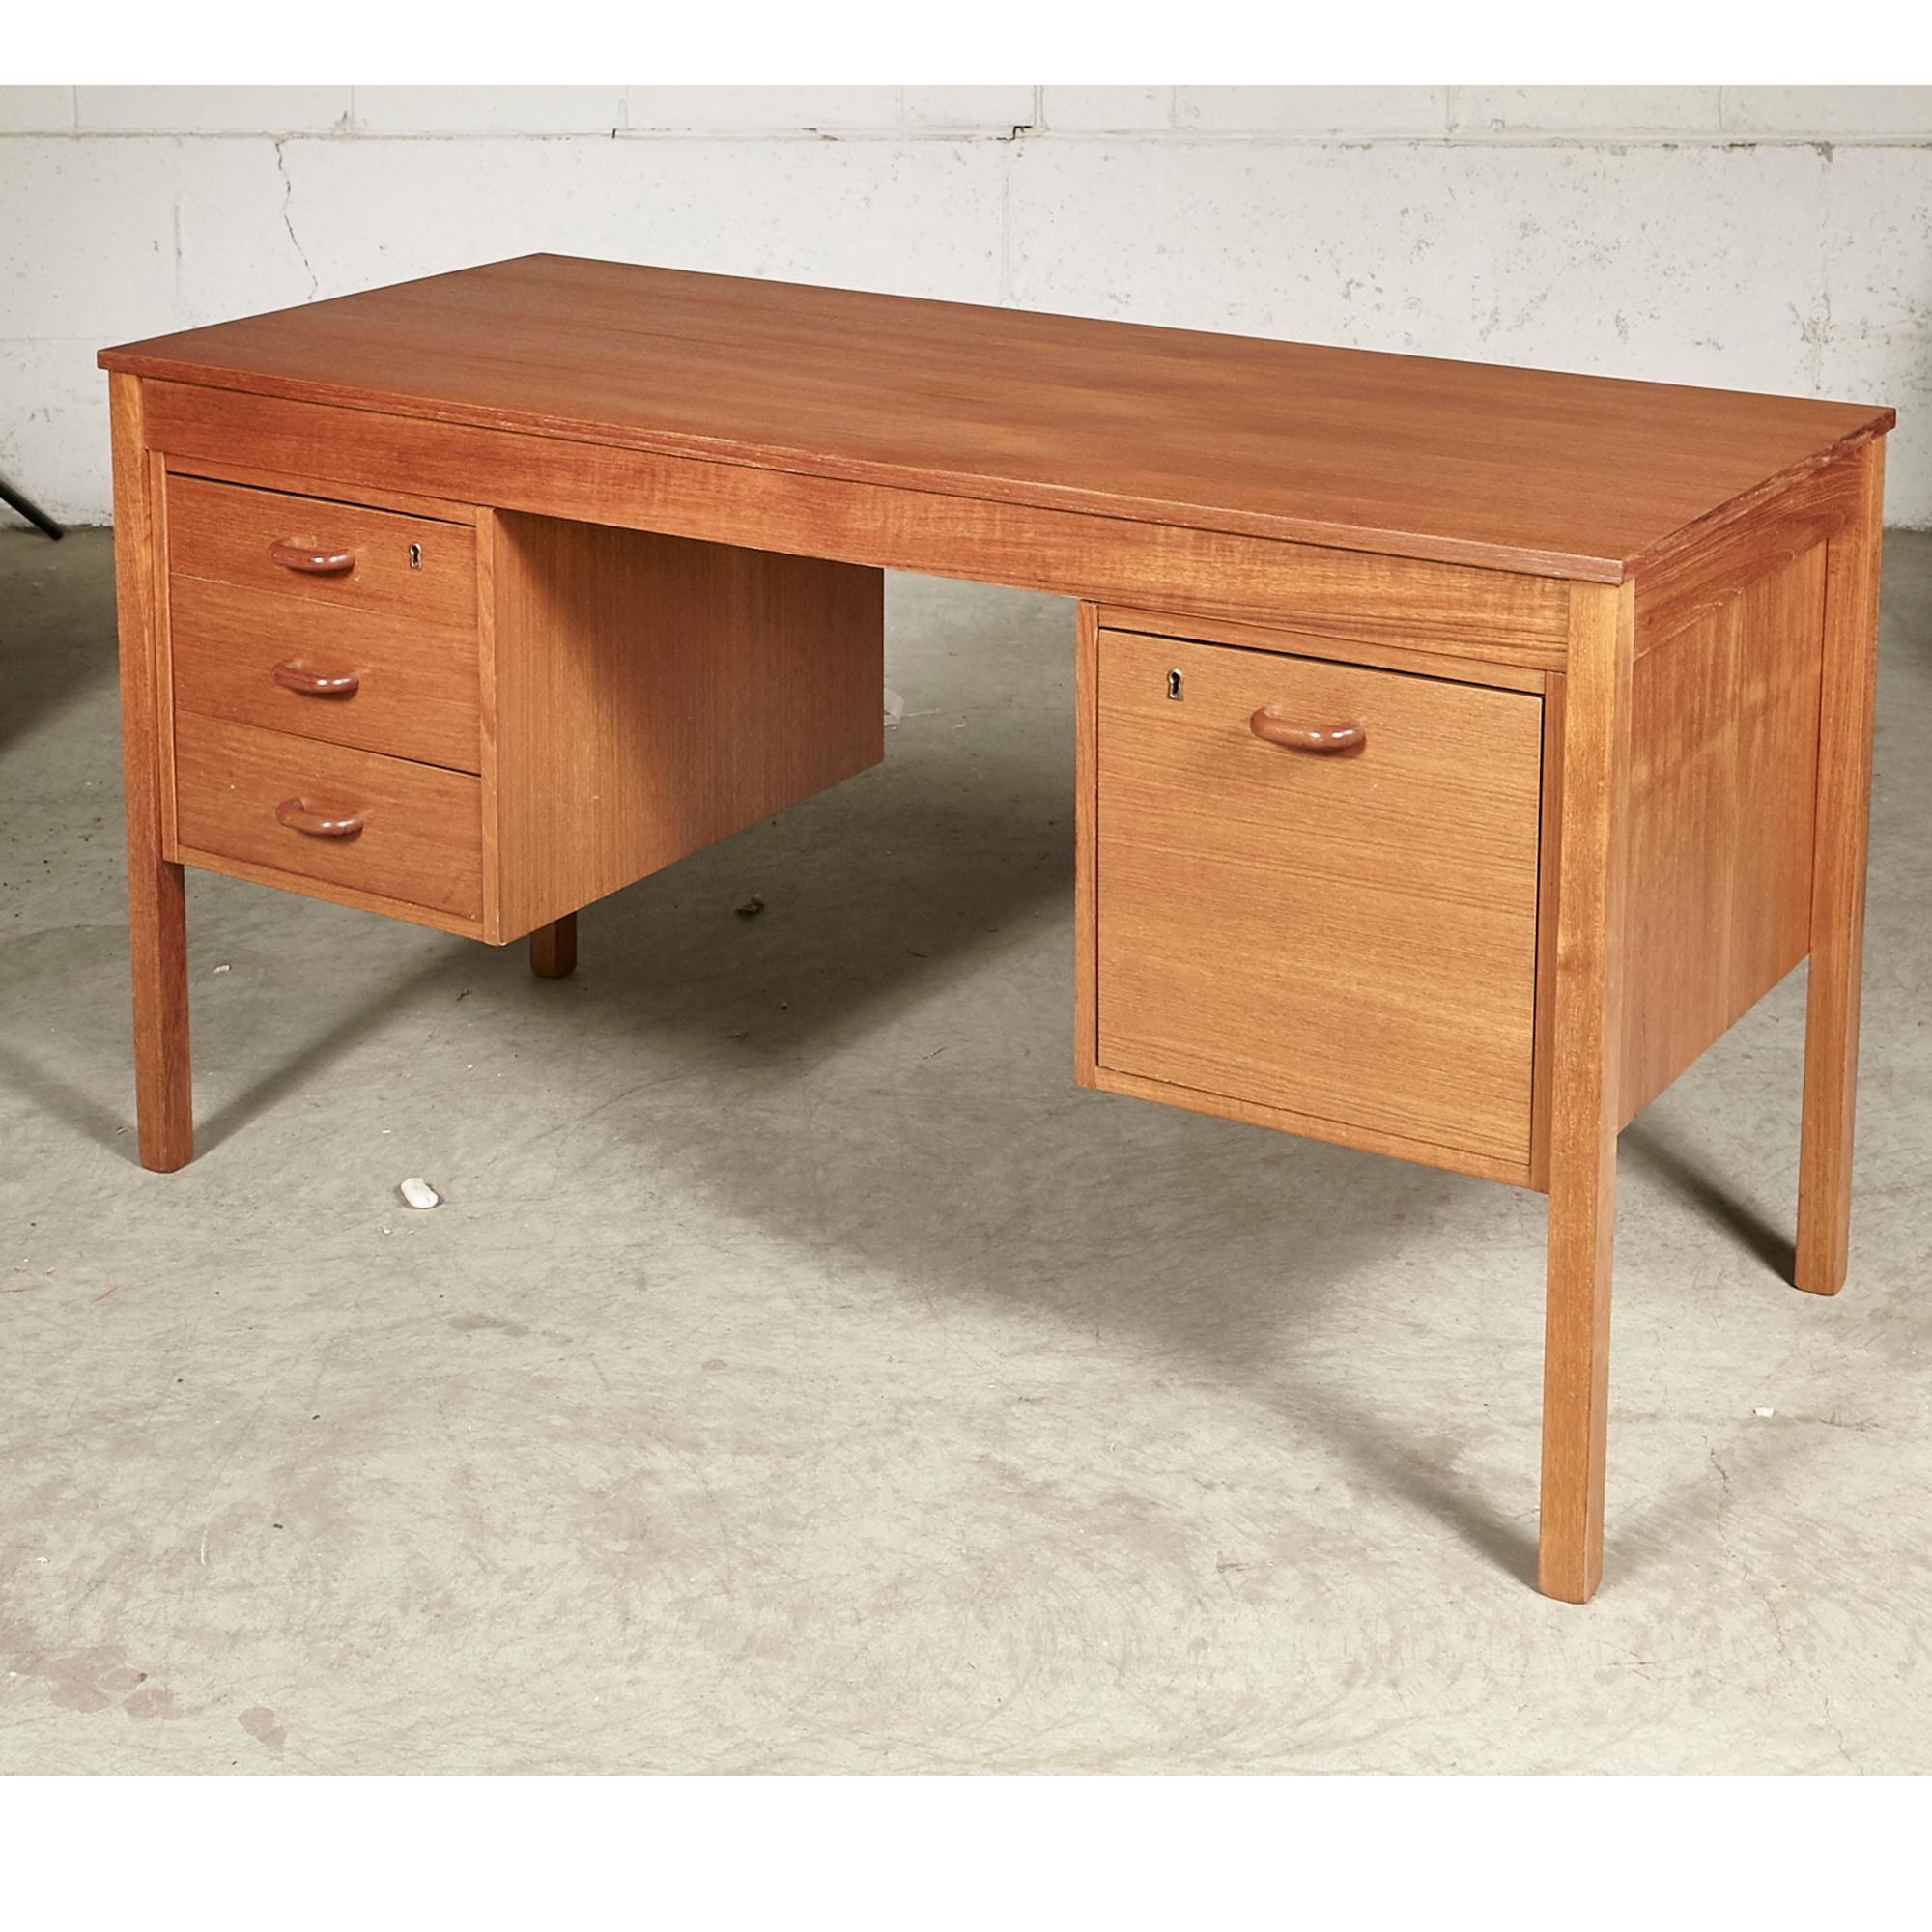 1970s Danish Teak Desk In Good Condition For Sale In Amherst, NH